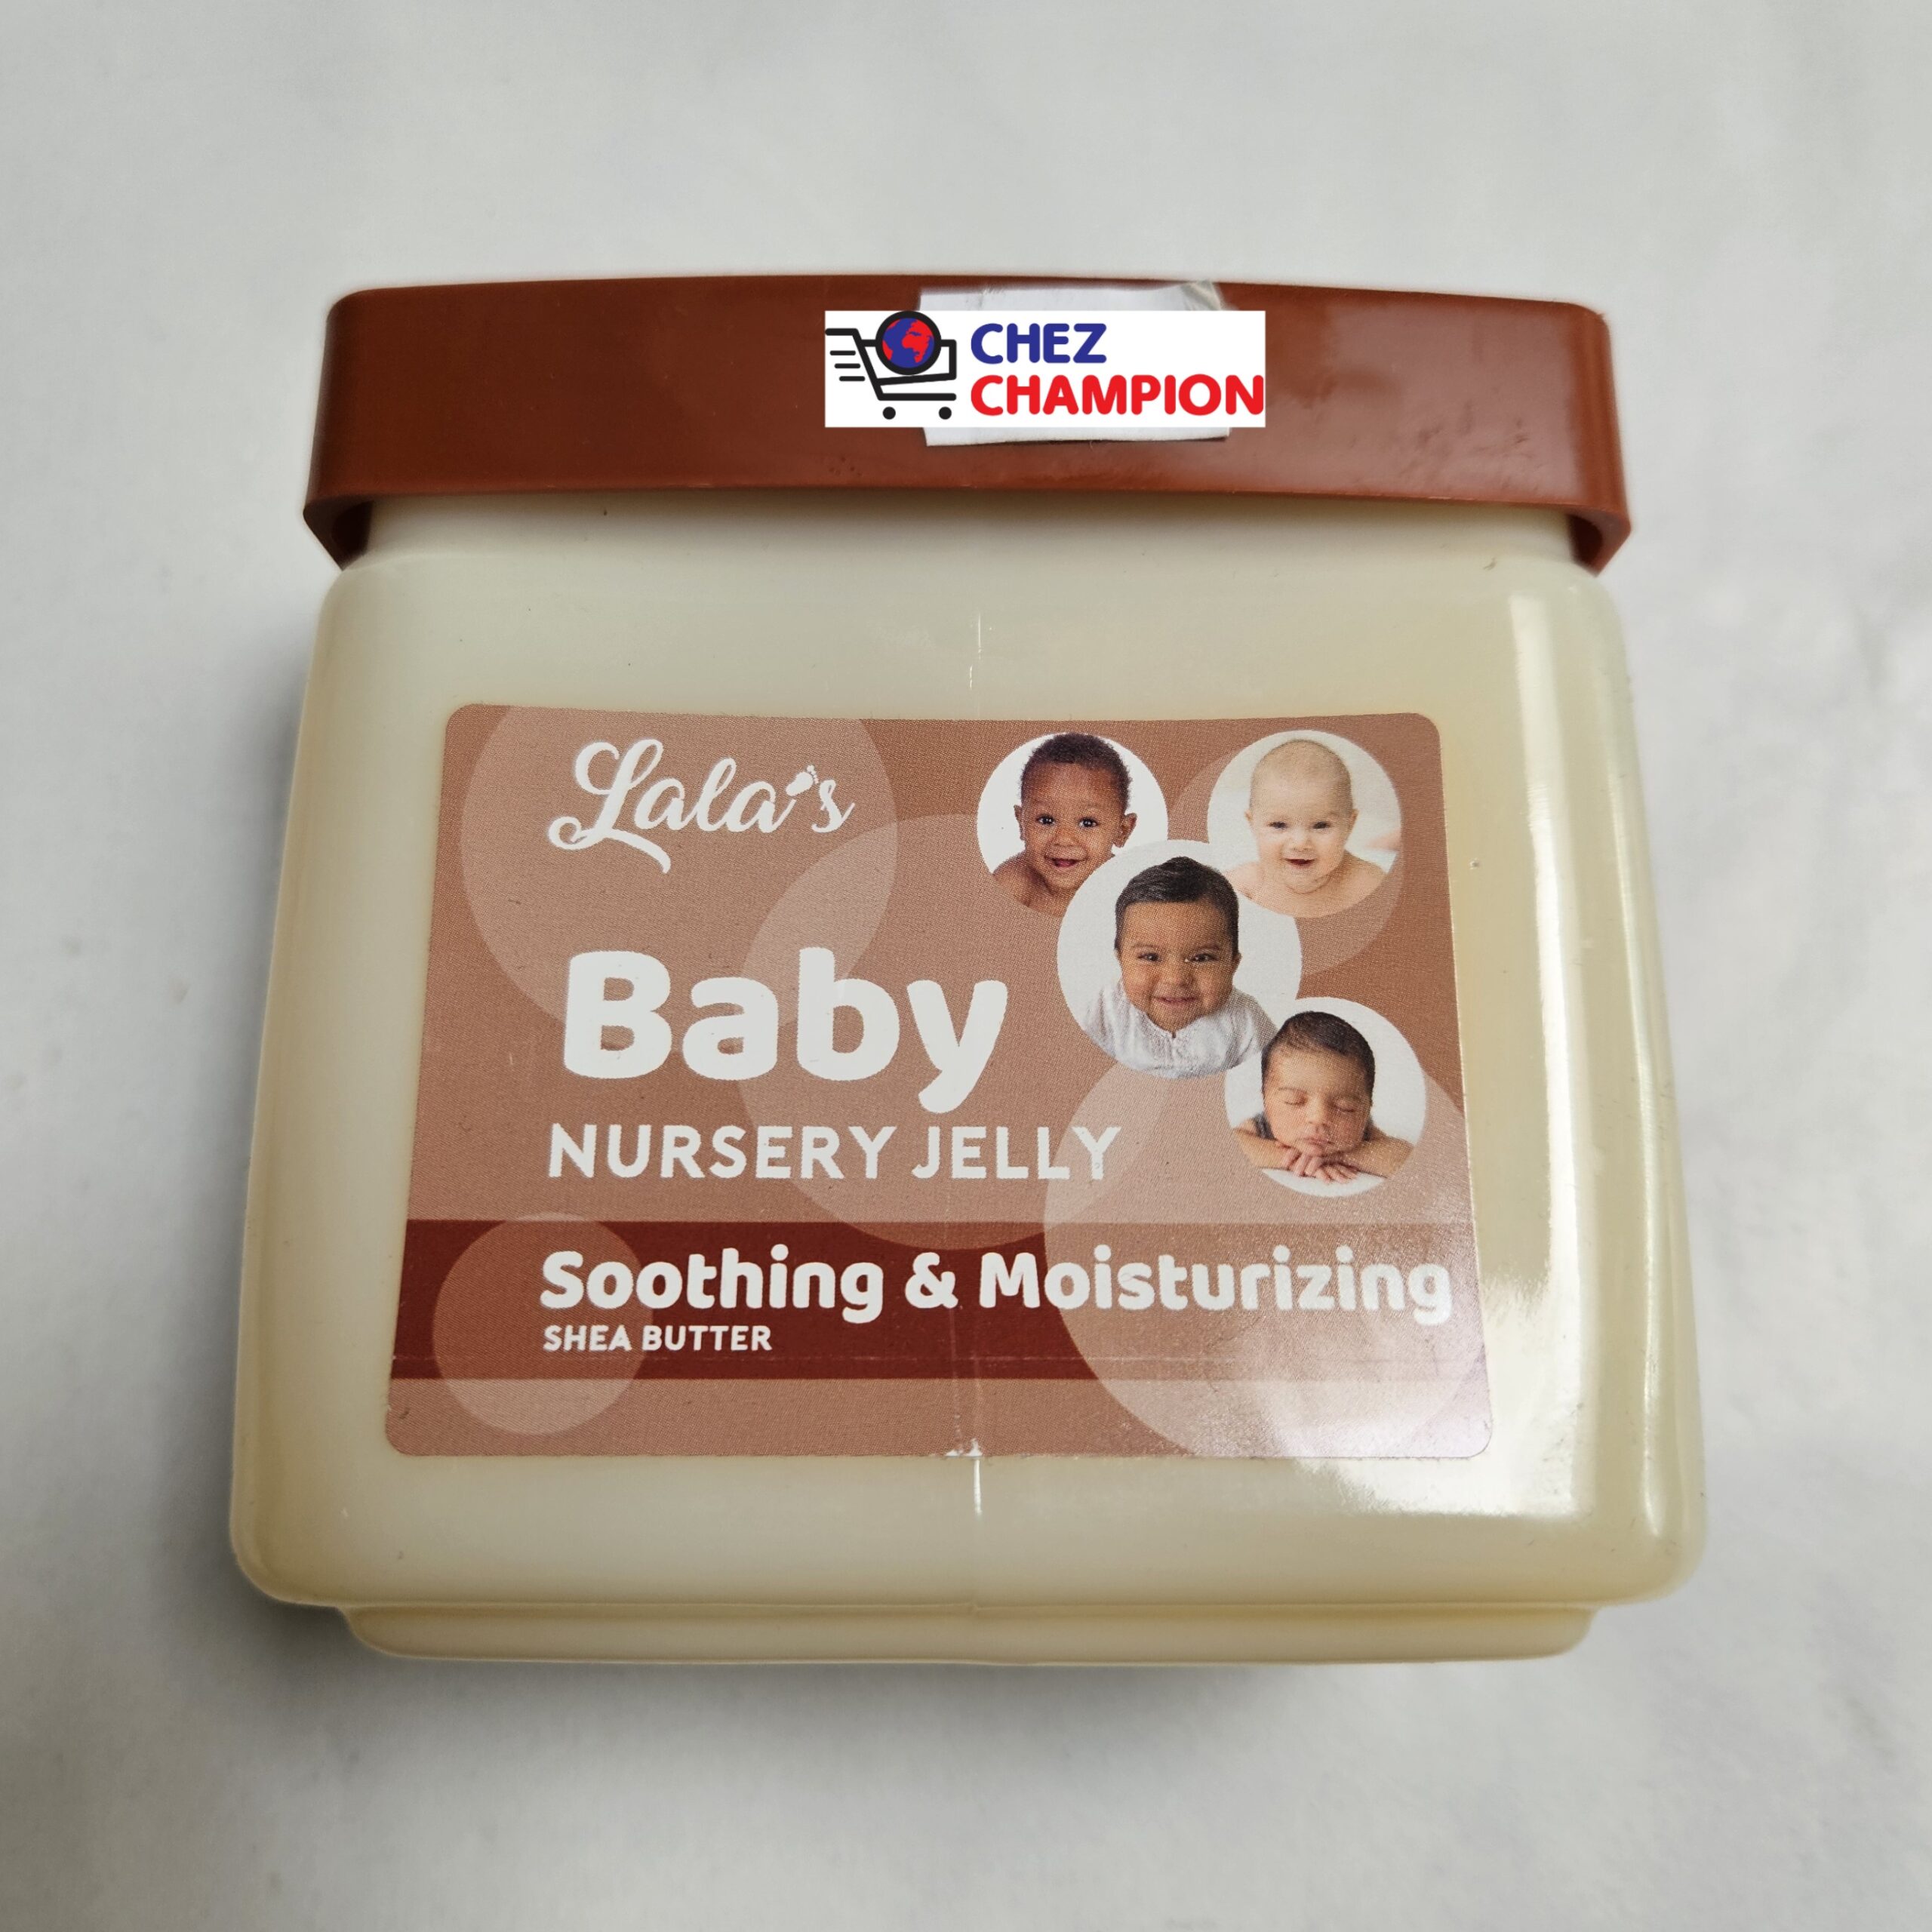 Lala’s baby nursery jelly shea butter smoothing and moisturiuzing – 368g